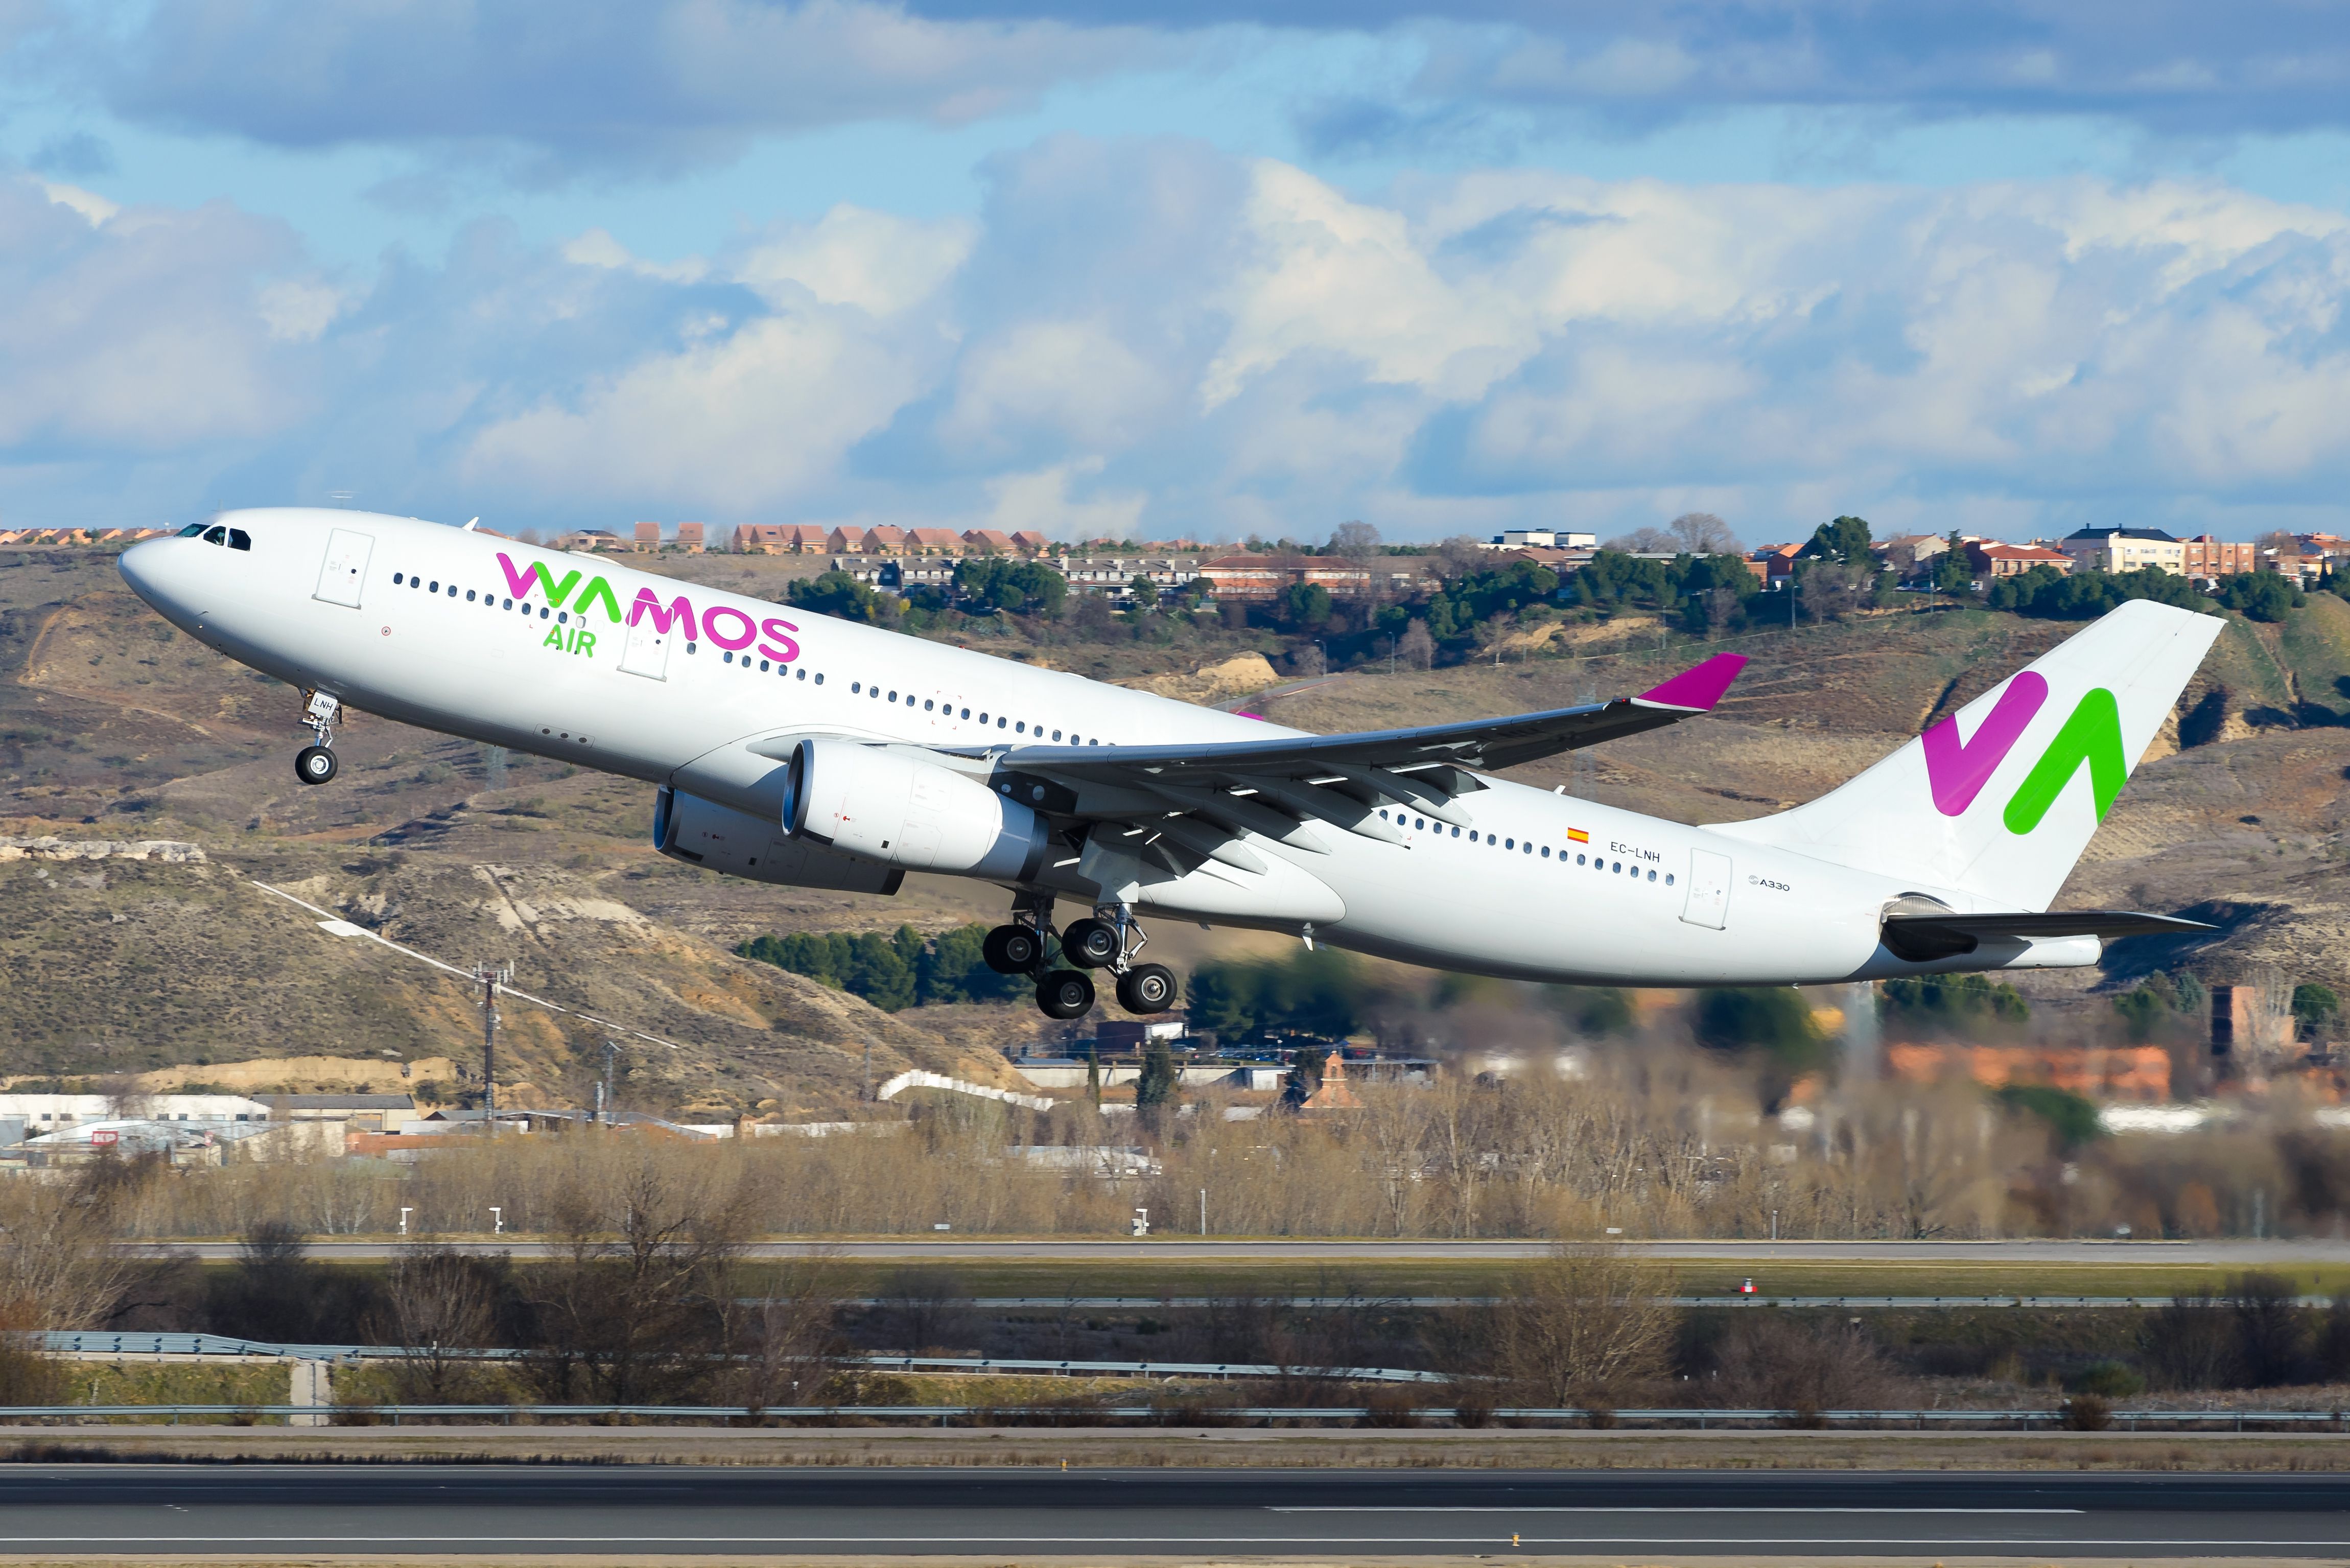 A Wamos Air Airbus A330-200 departing from Madrid 